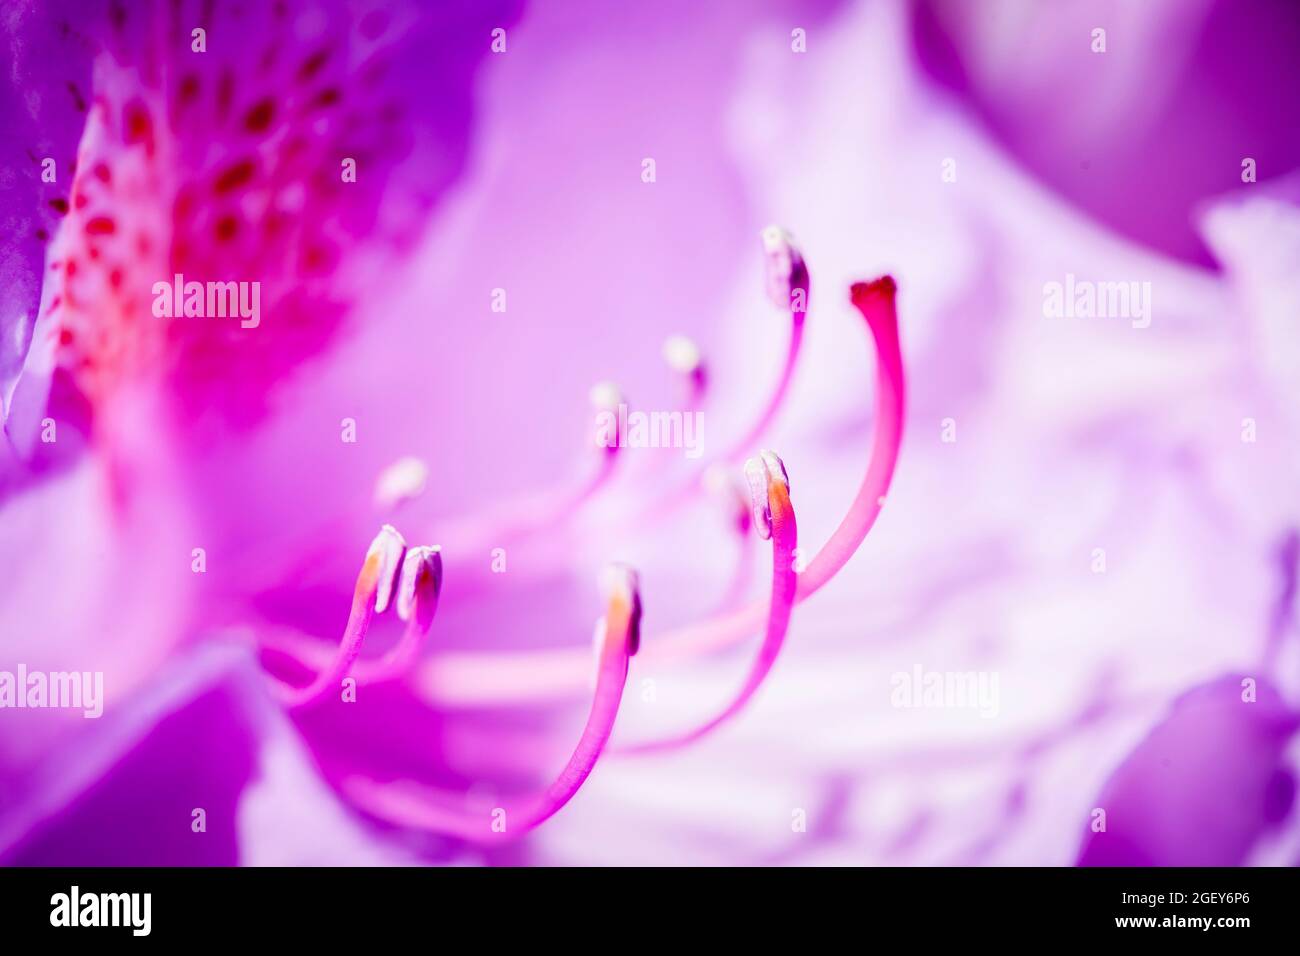 Macro shot of a pink rhododendron flower with easily recognizable stamens in front of blurred petals. Stock Photo